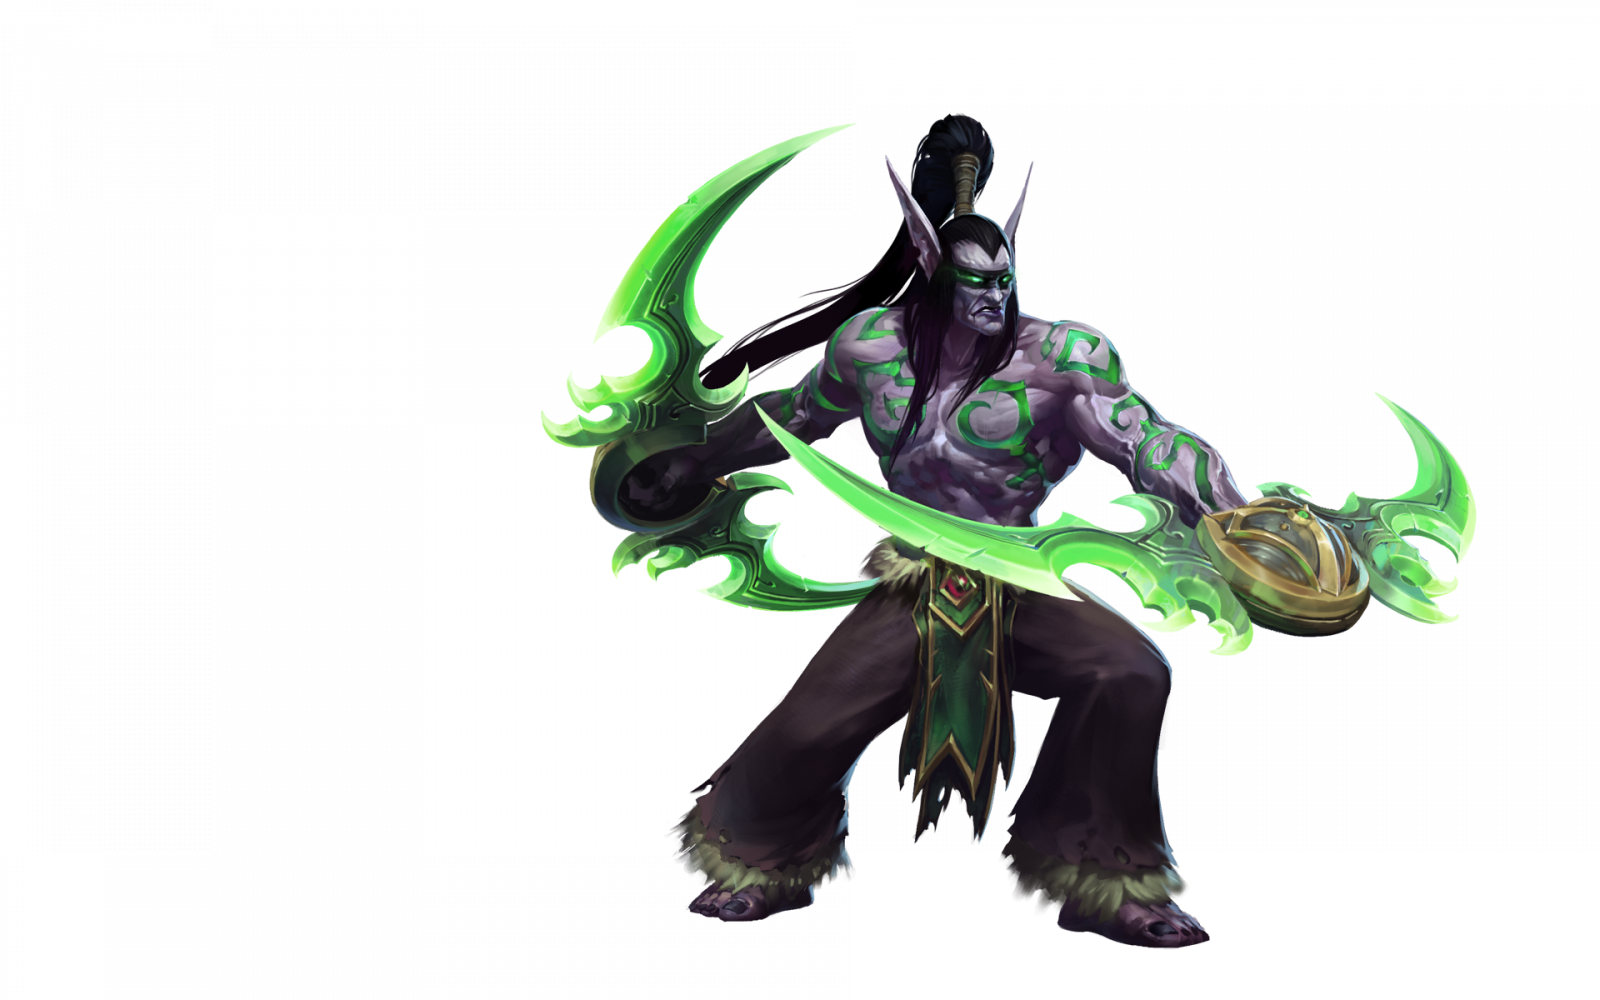 wield-the-might-of-the-illidan-the-betrayer-and-slice-down-y_34xw.1920.png